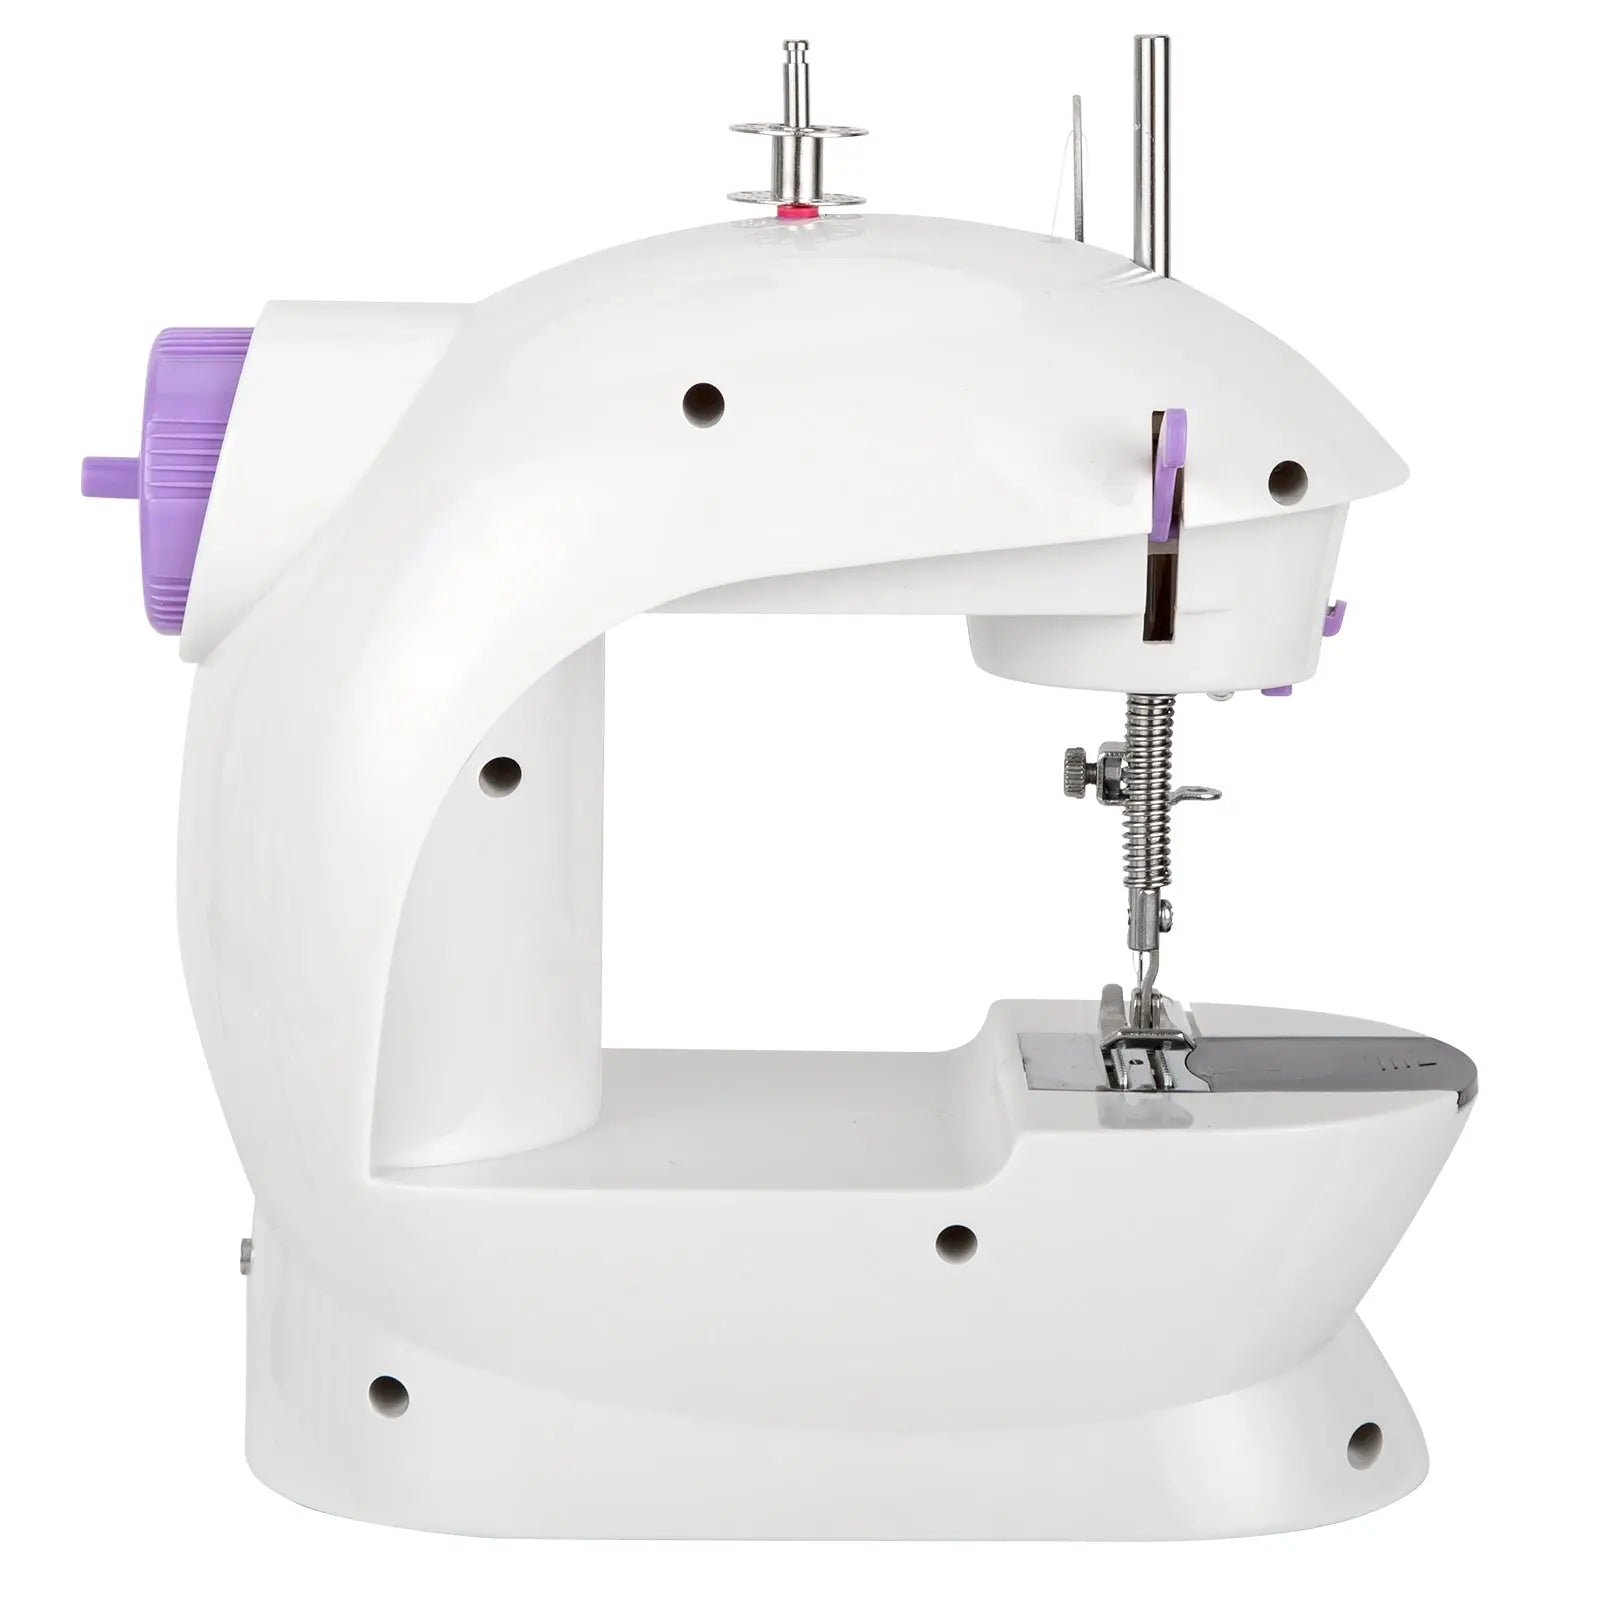 Portable Desktop Household Sewing Machine With Extension Table - TikTokFavorites